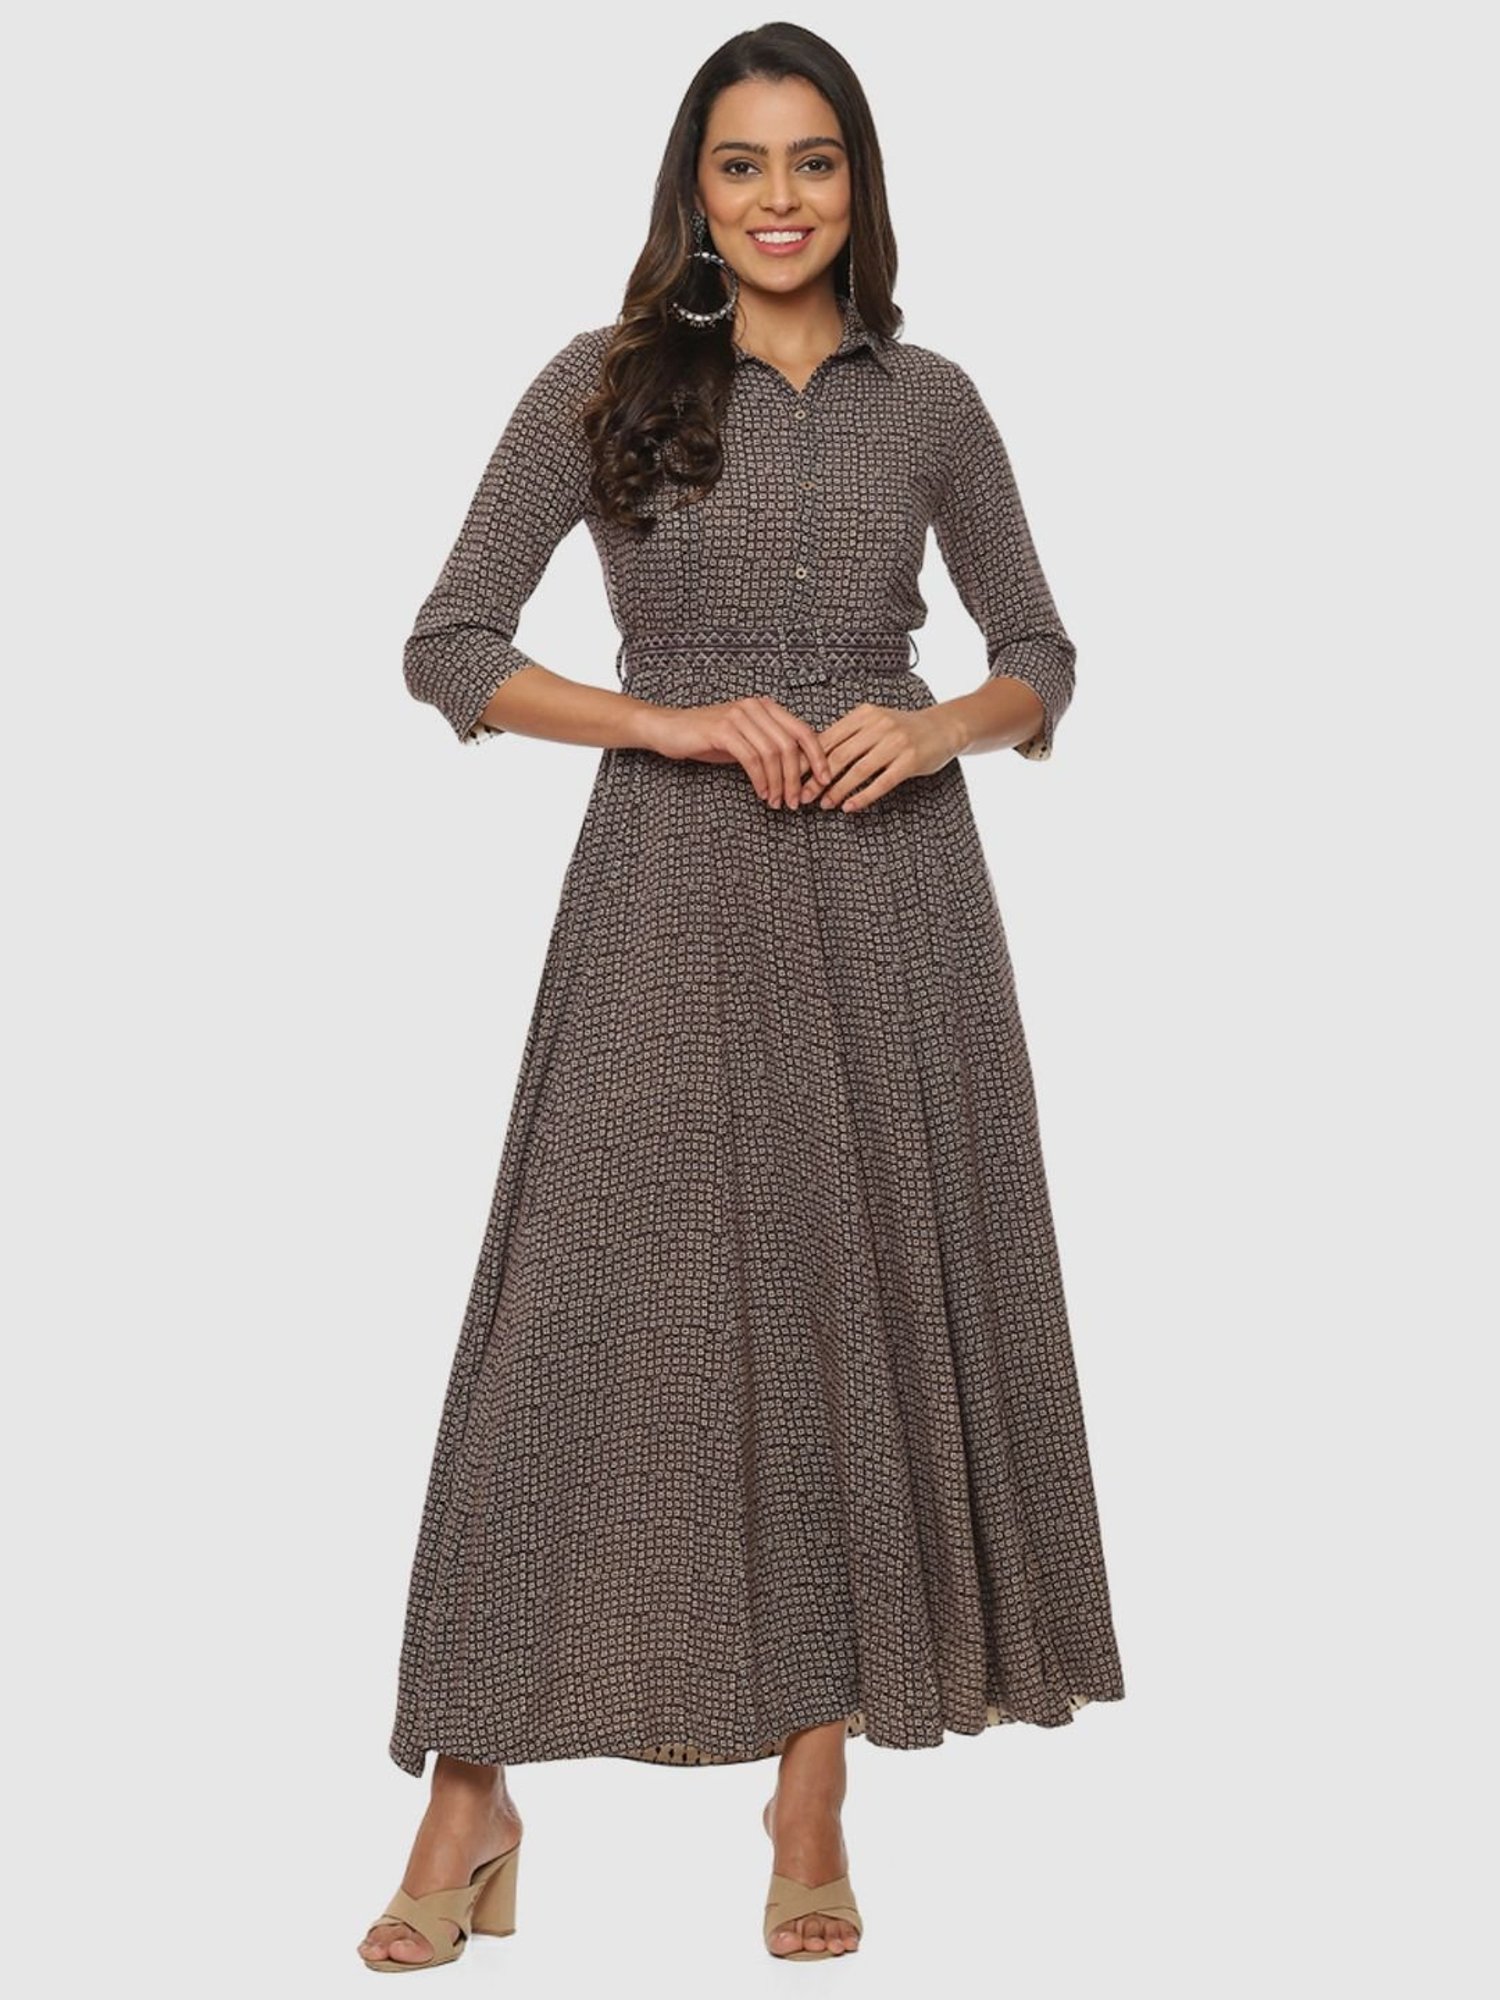 Buy BIBA Navy Printed Round Neck Cotton Womens Tired Dress | Shoppers Stop